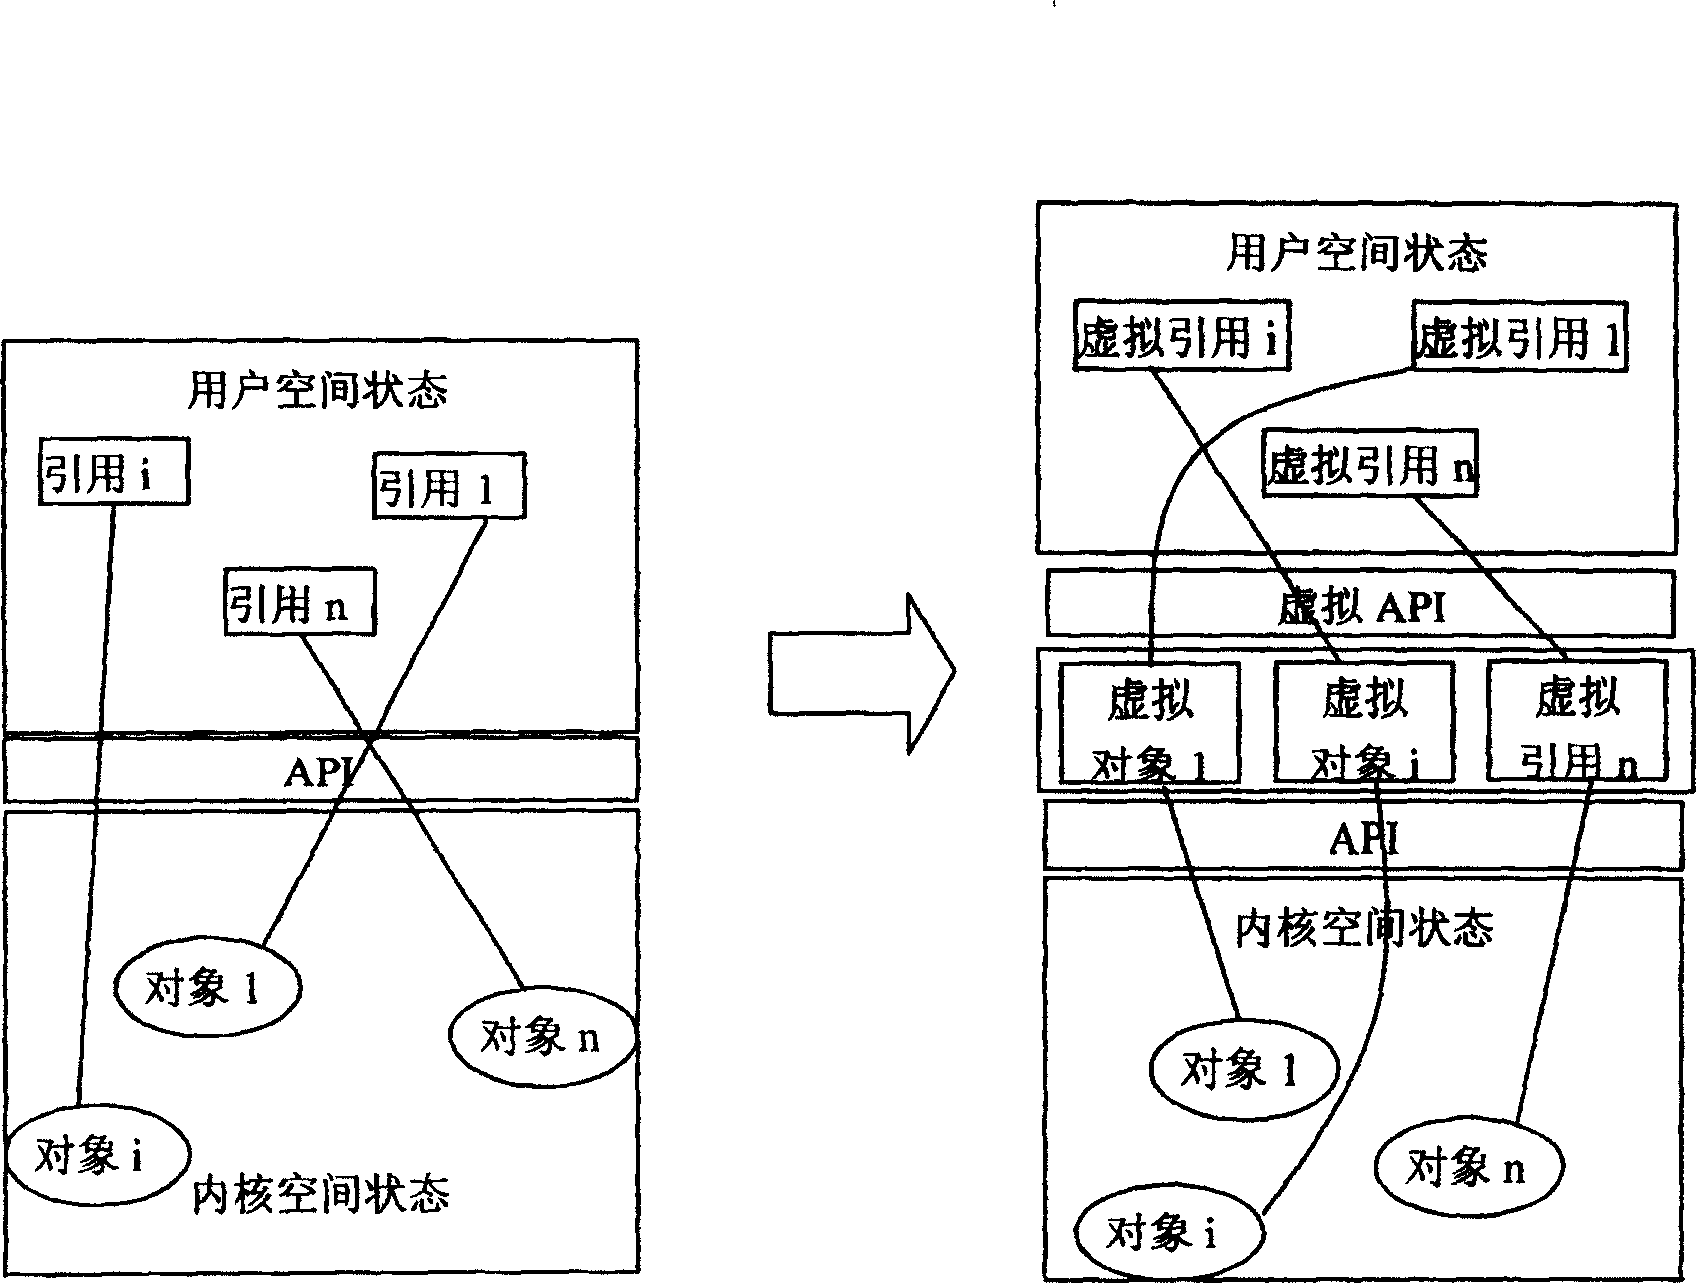 Method for implementing checkpoint of Linux program at user level based on virtual kernel object